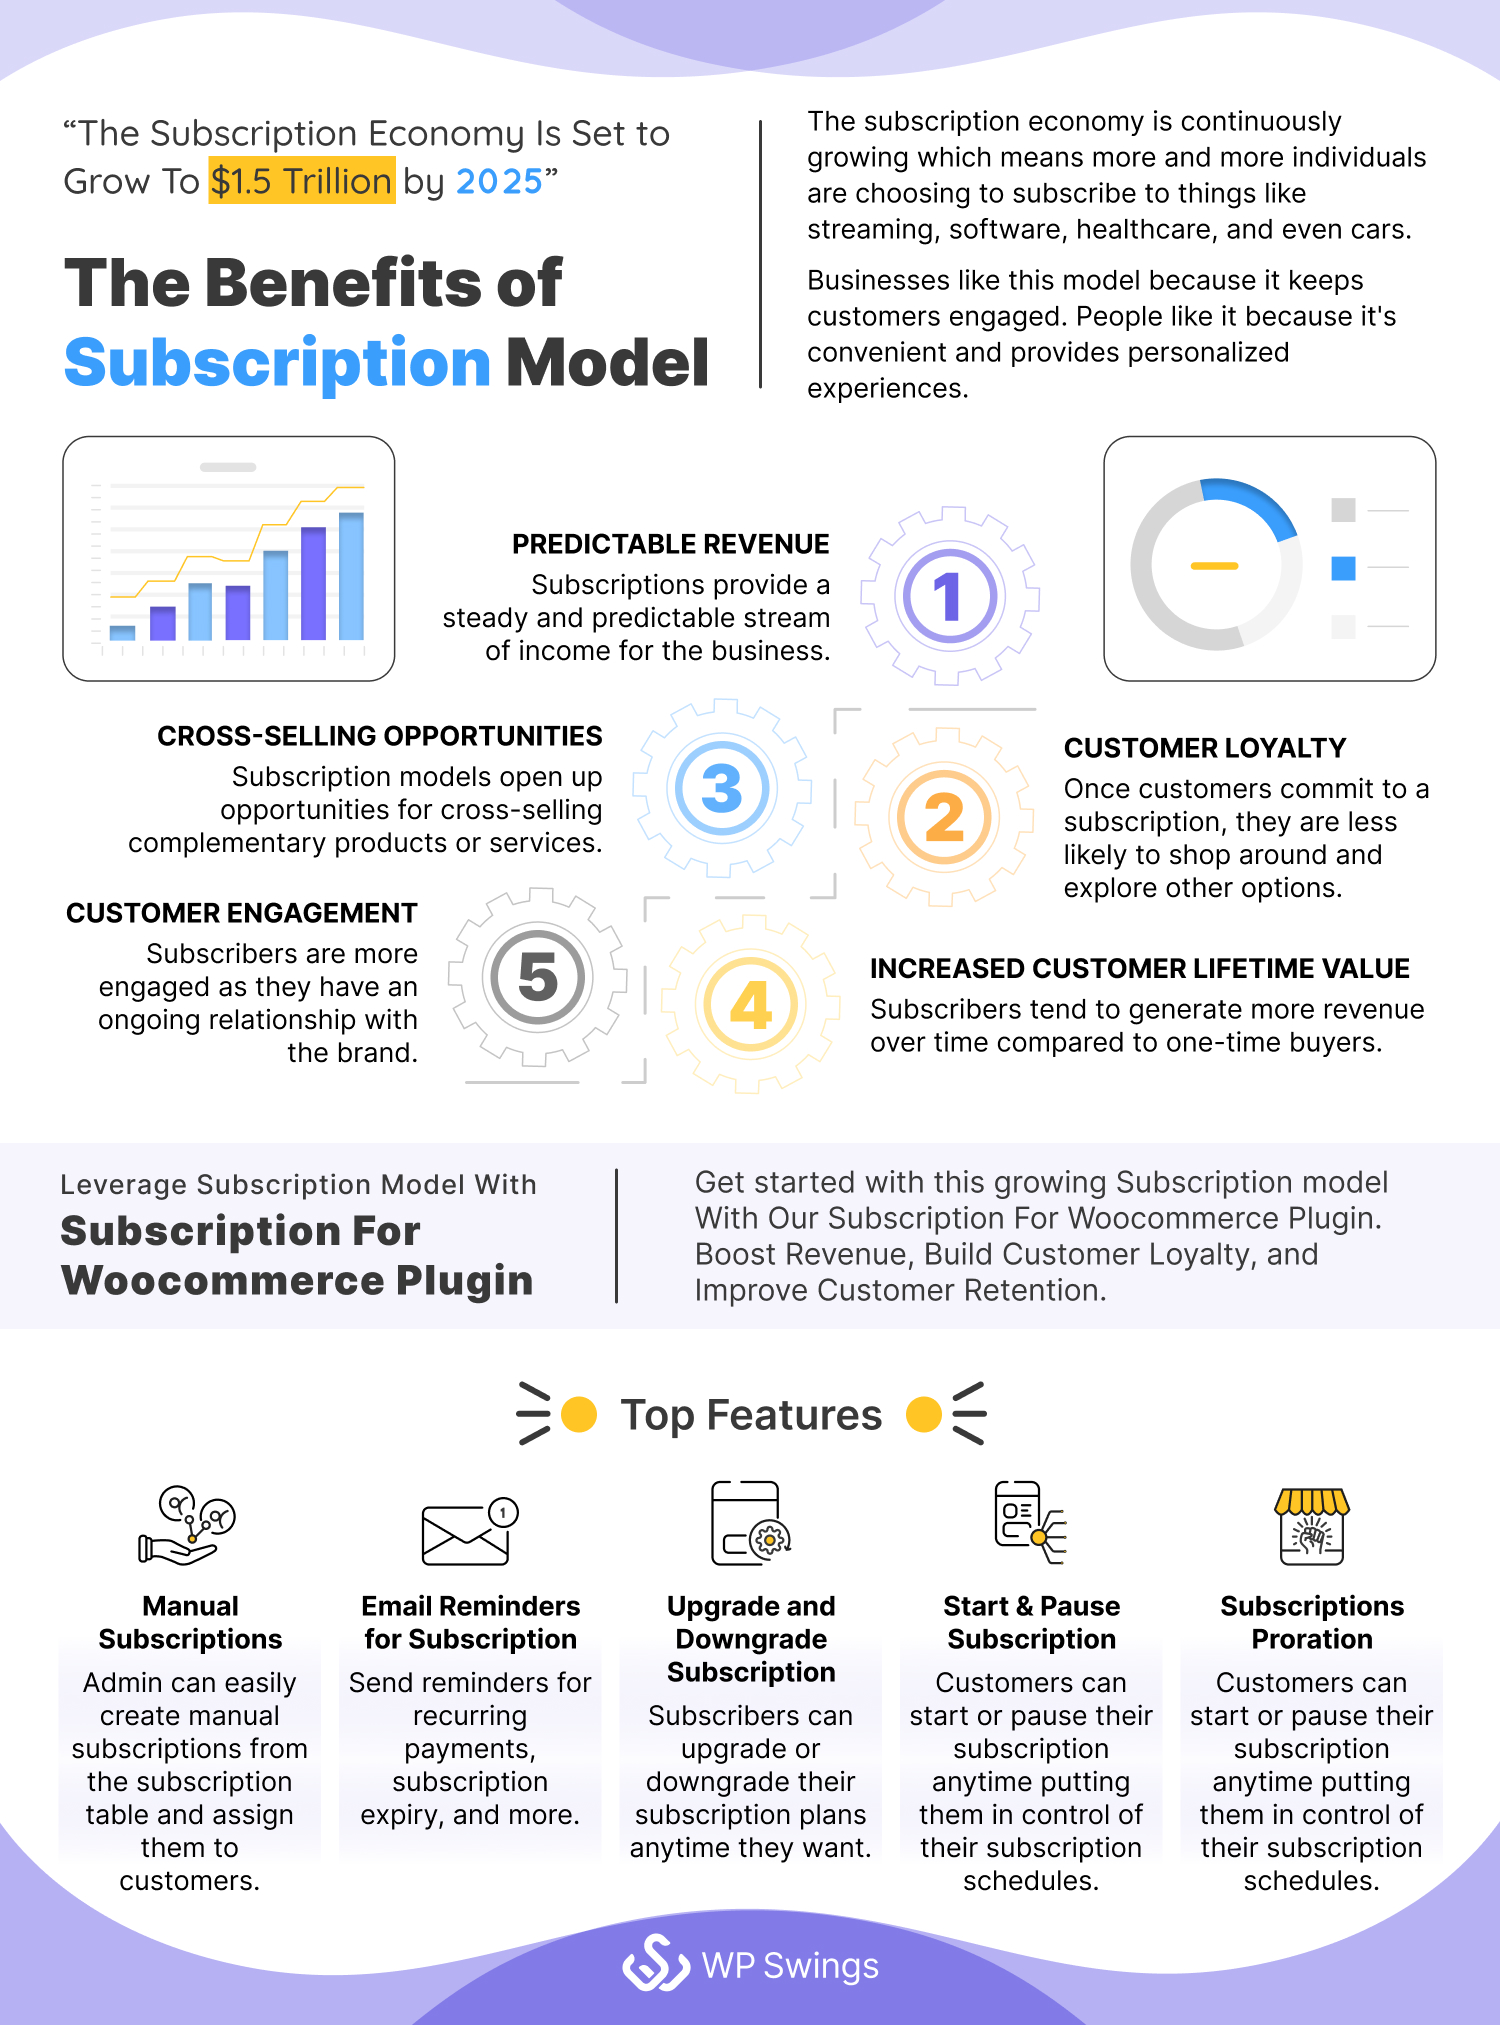 The Benefits of Subscription Model